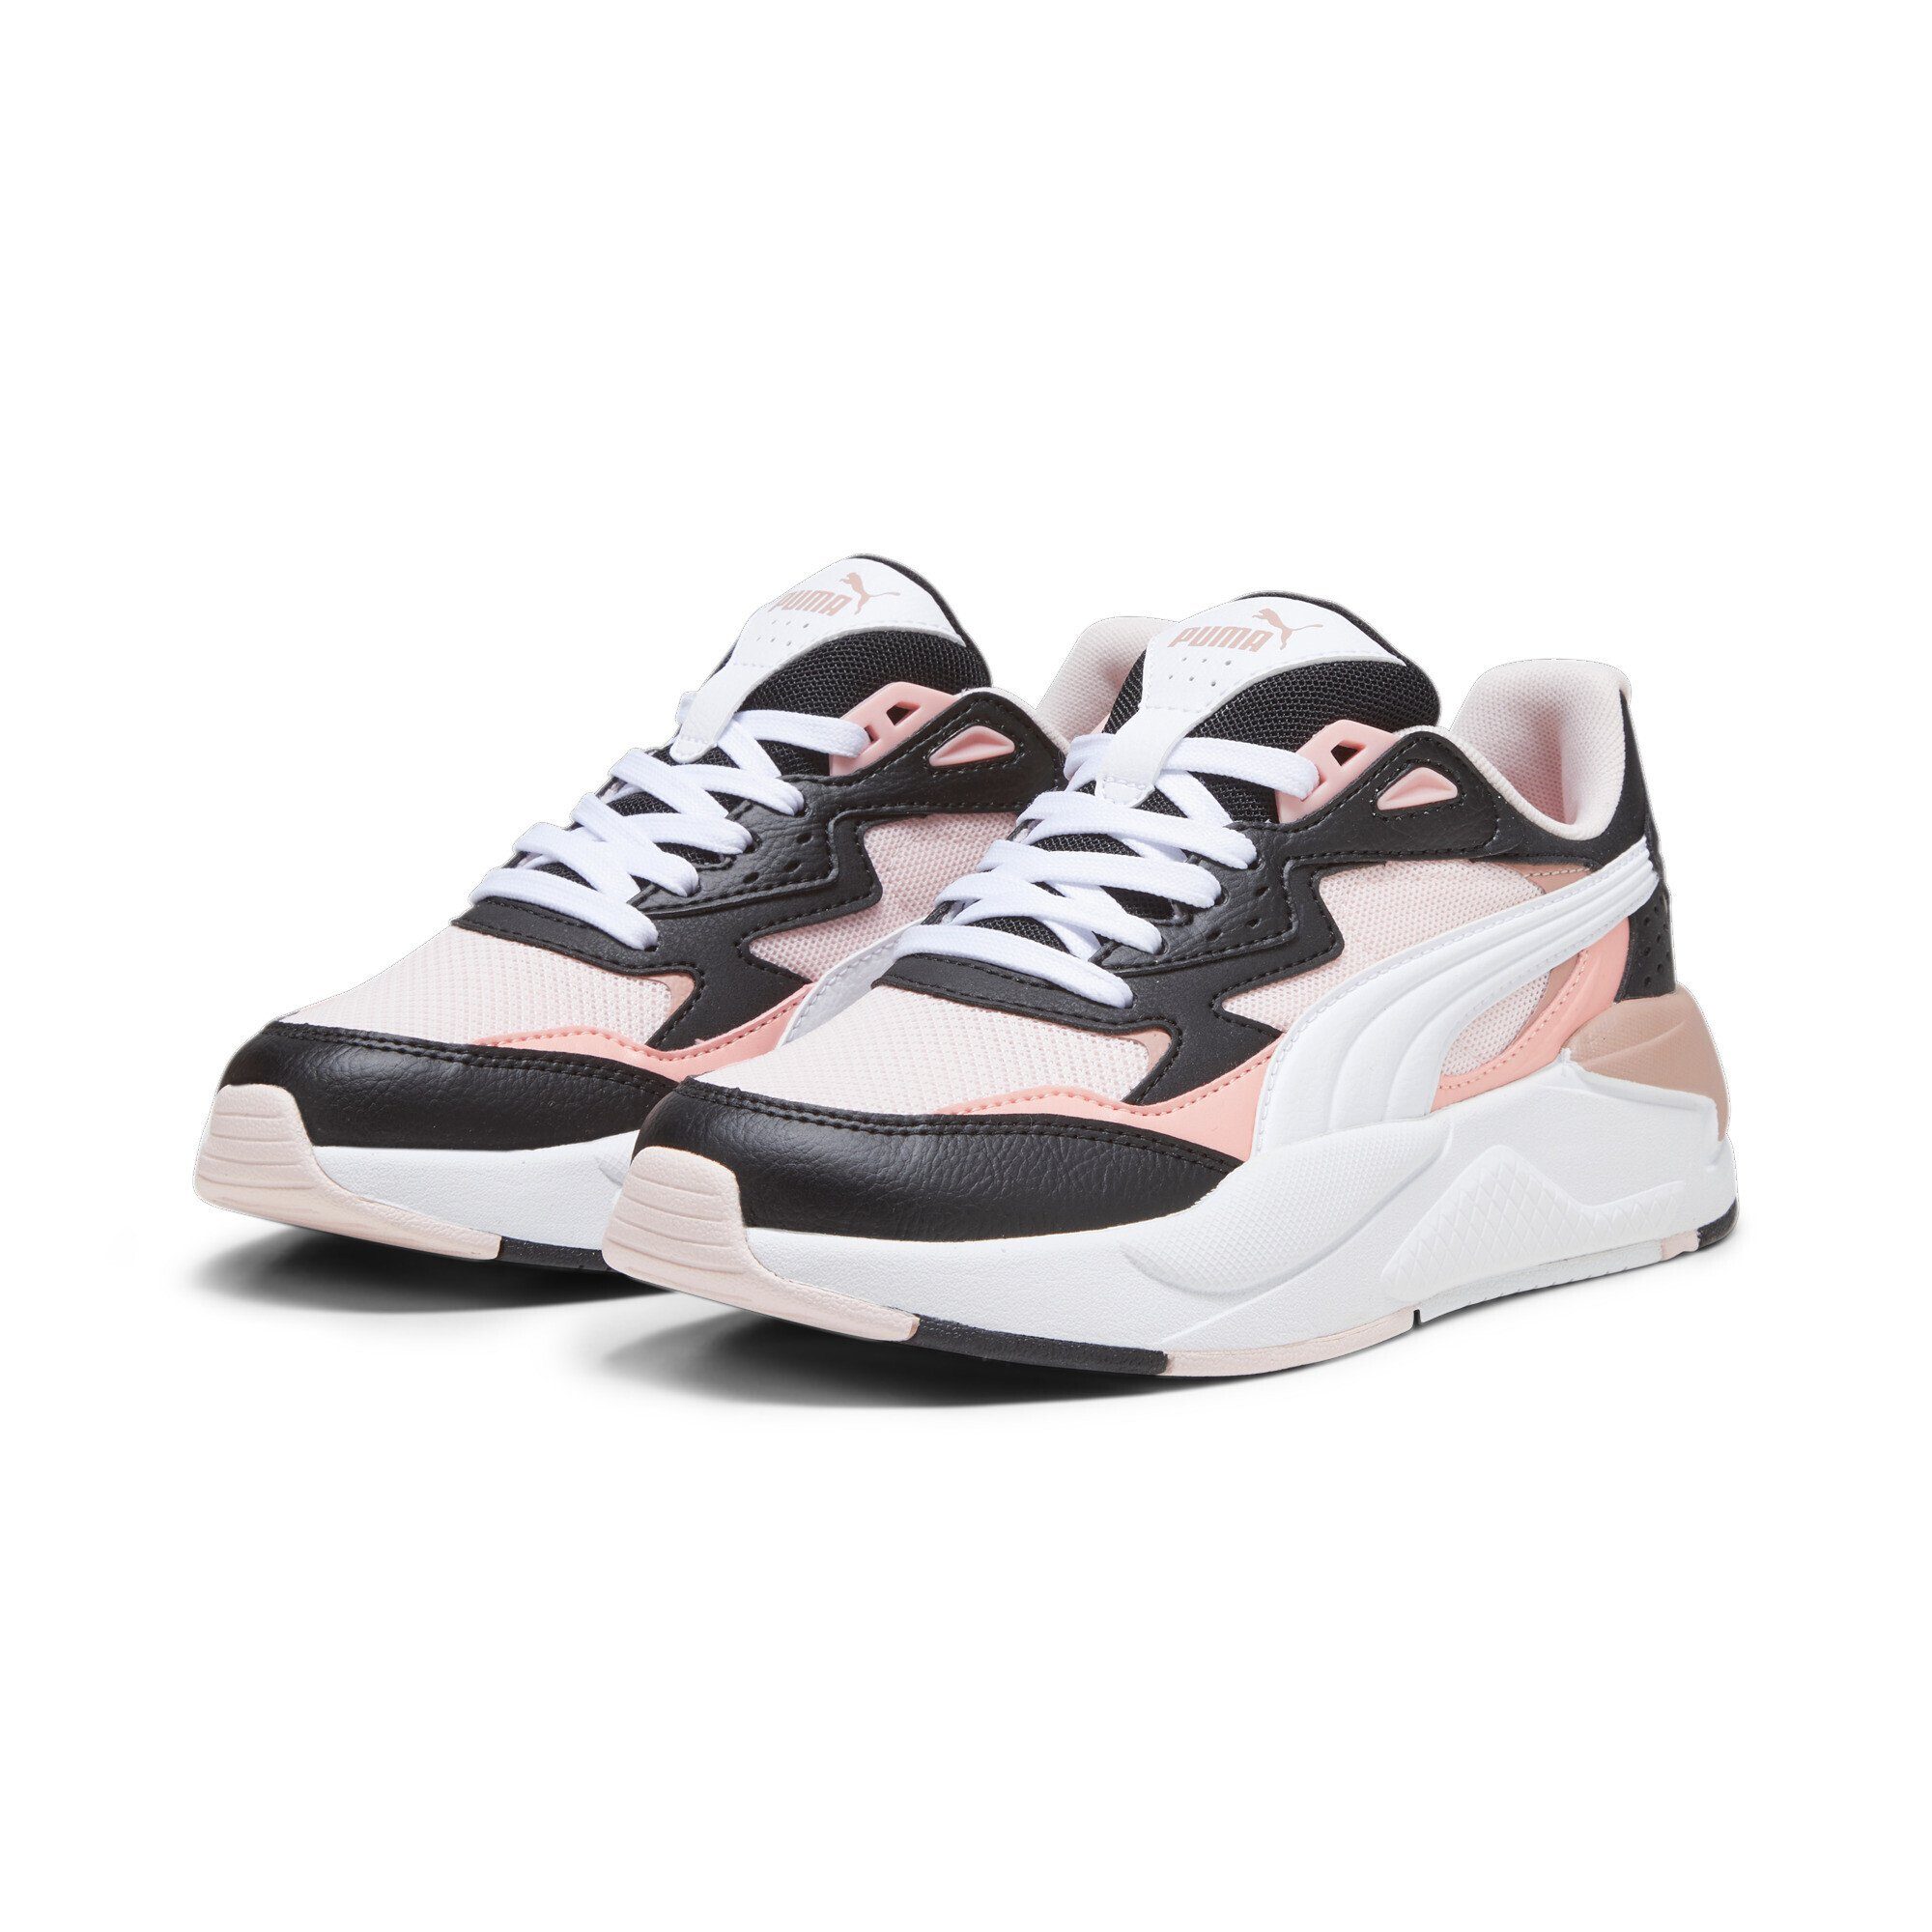 PUMA X-Ray Speed Sneakers Jugendliche Sneaker Frosty Pink White Black Peach Smoothie